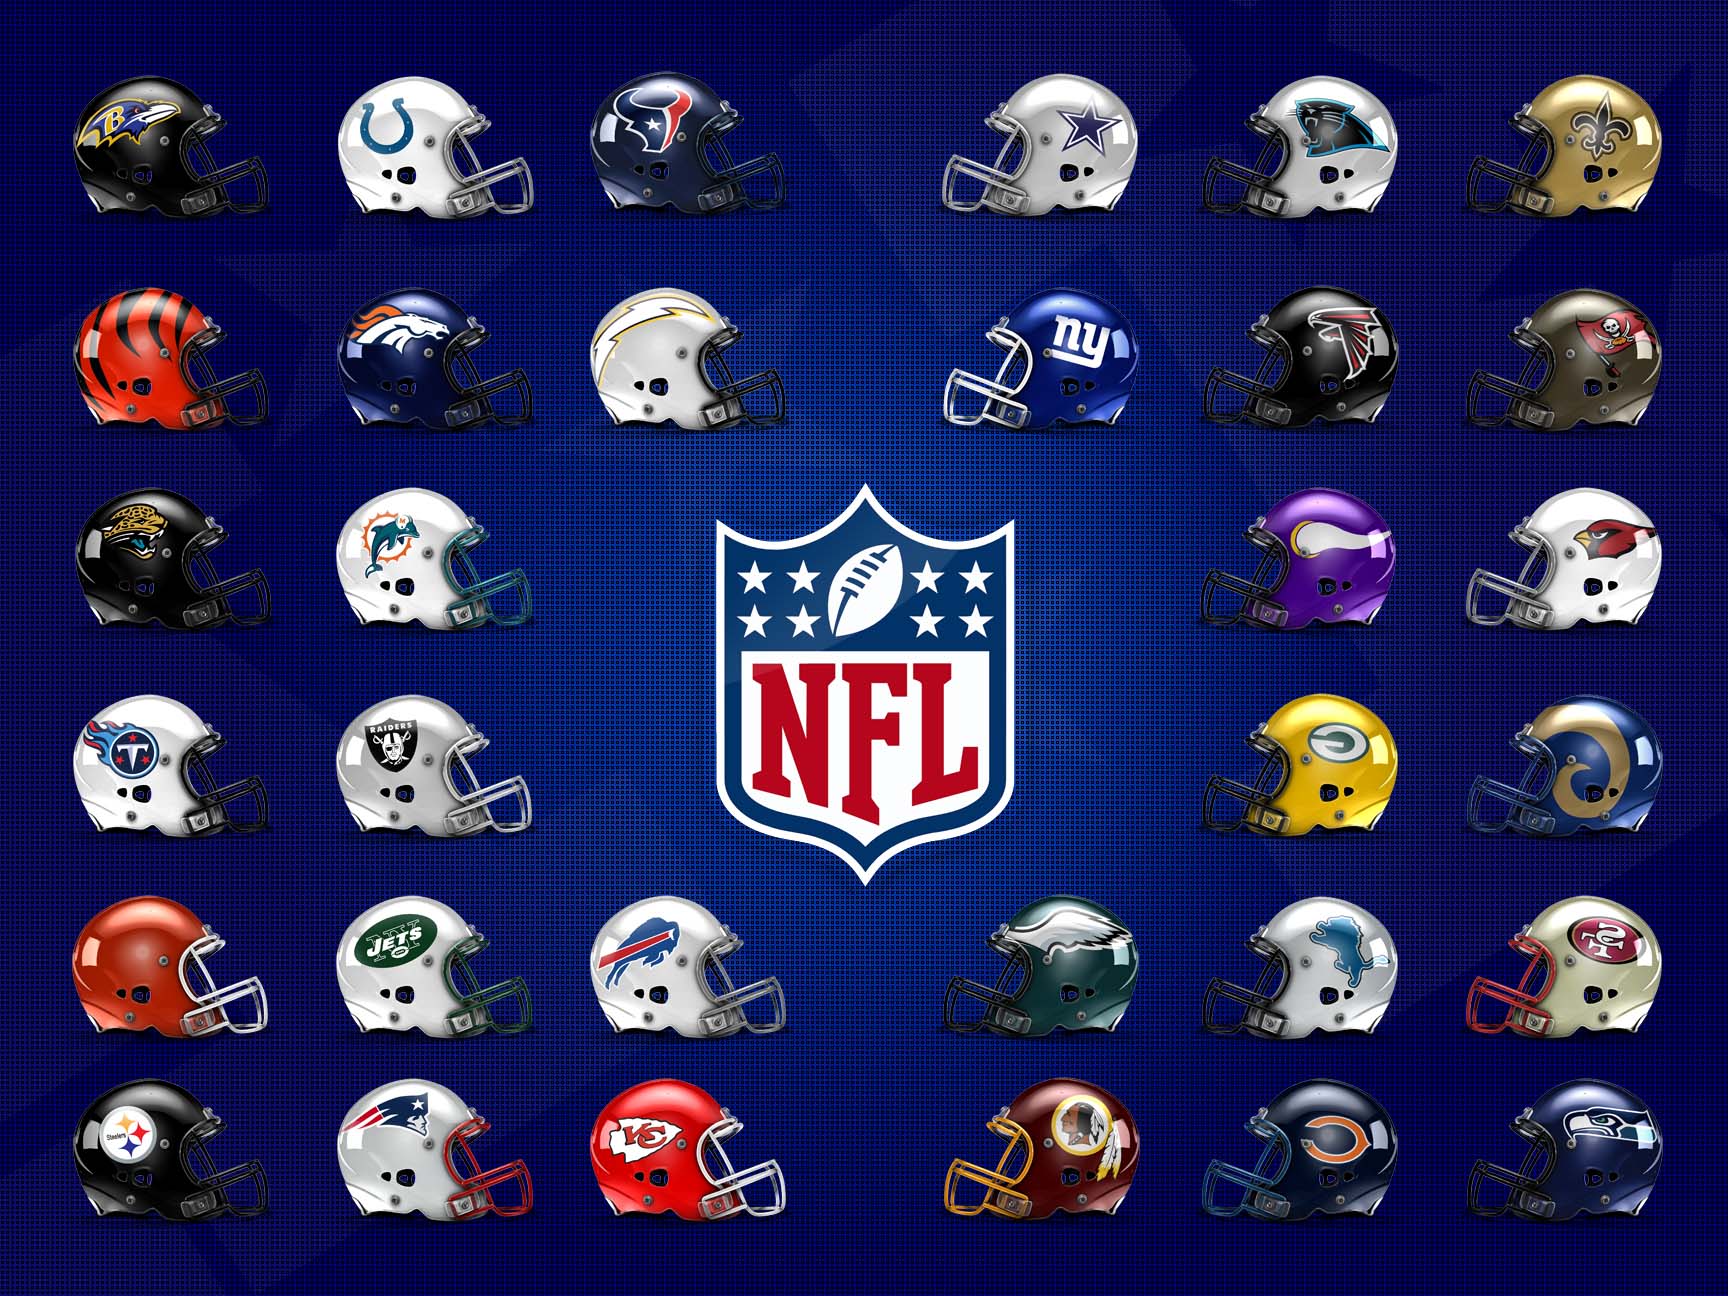 Helmets from NFL teams represent high-level cooperation which creates Super Bowl Wisdom